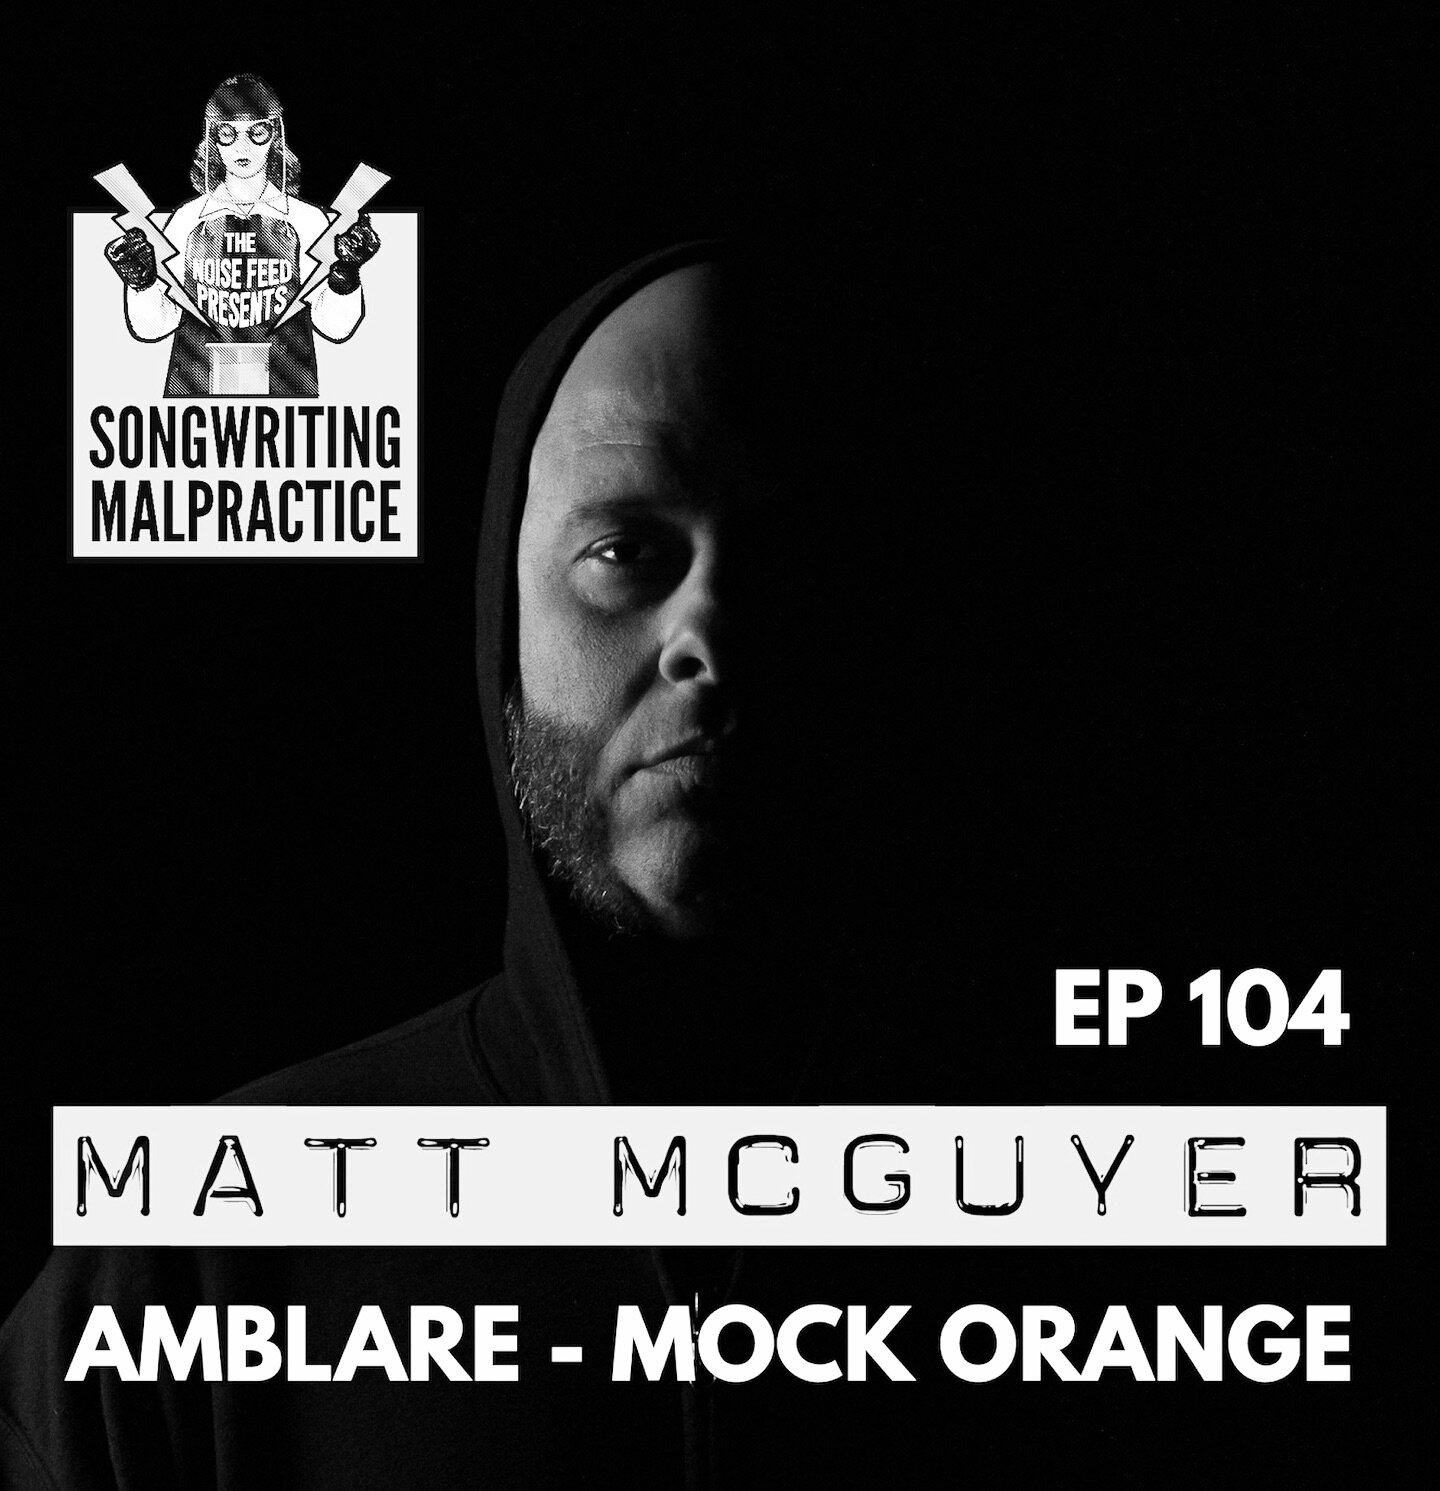 @amblareband vocalist/guitarist Matt McGuyer is today&rsquo;s guest on the great Songwriting Malpractice podcast, presented by @thenoisefeed!

Check it out for a deep convo about McGuyer&rsquo;s music making&hellip; and dig into the Songwriting Malpr